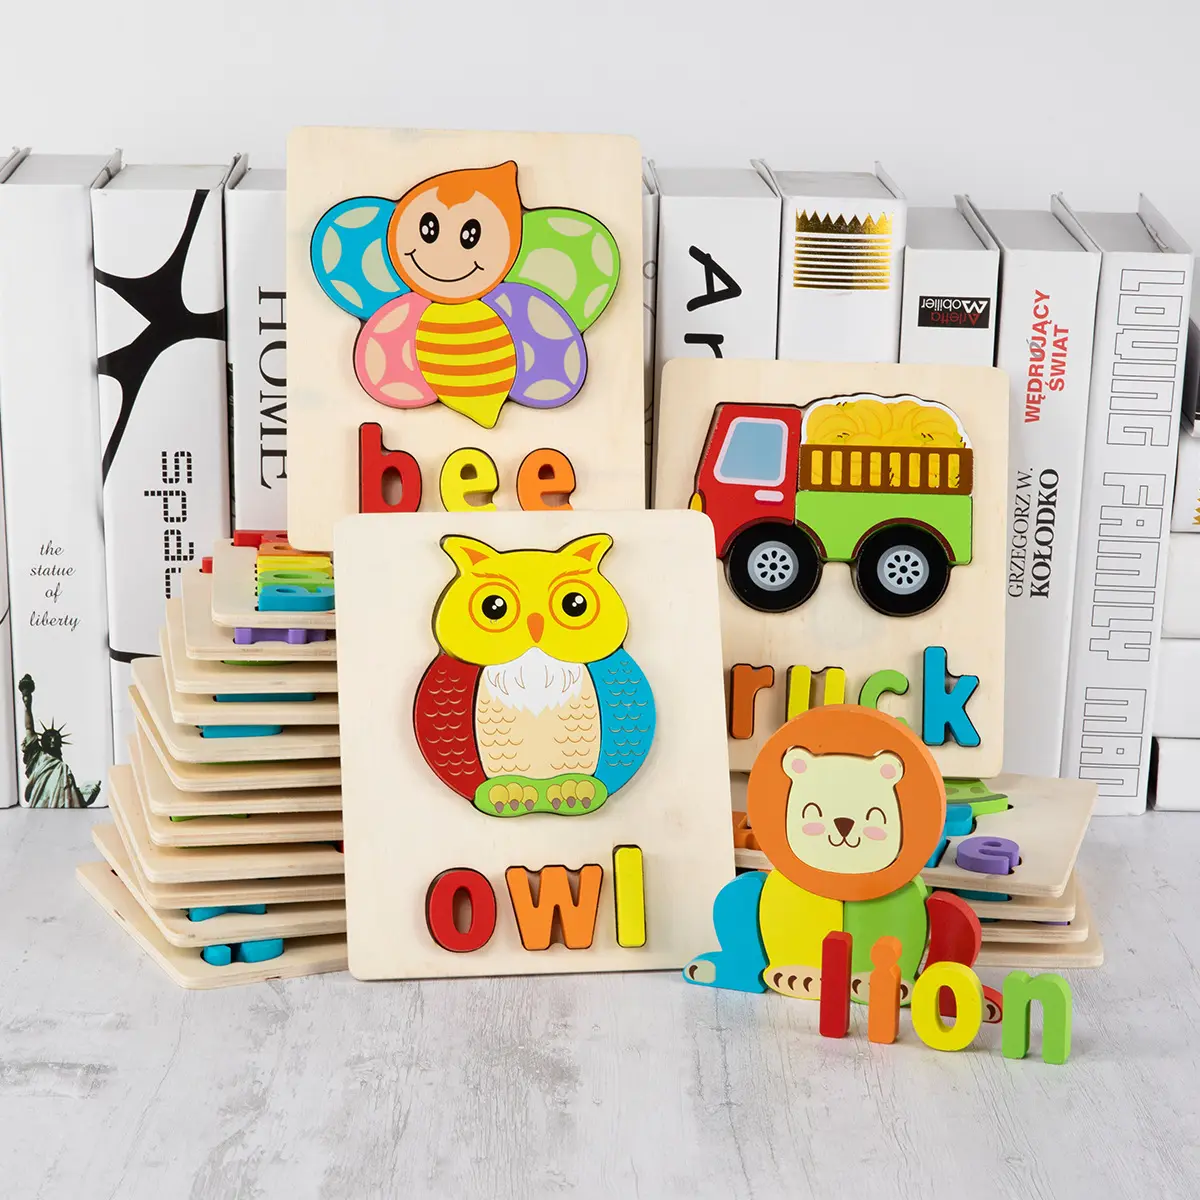 Customized Wooden Montessori Kids Toy 3D Puzzle Jigsaw Board Animal Car Puzzles Children Baby Wooden Educational Learning Toys